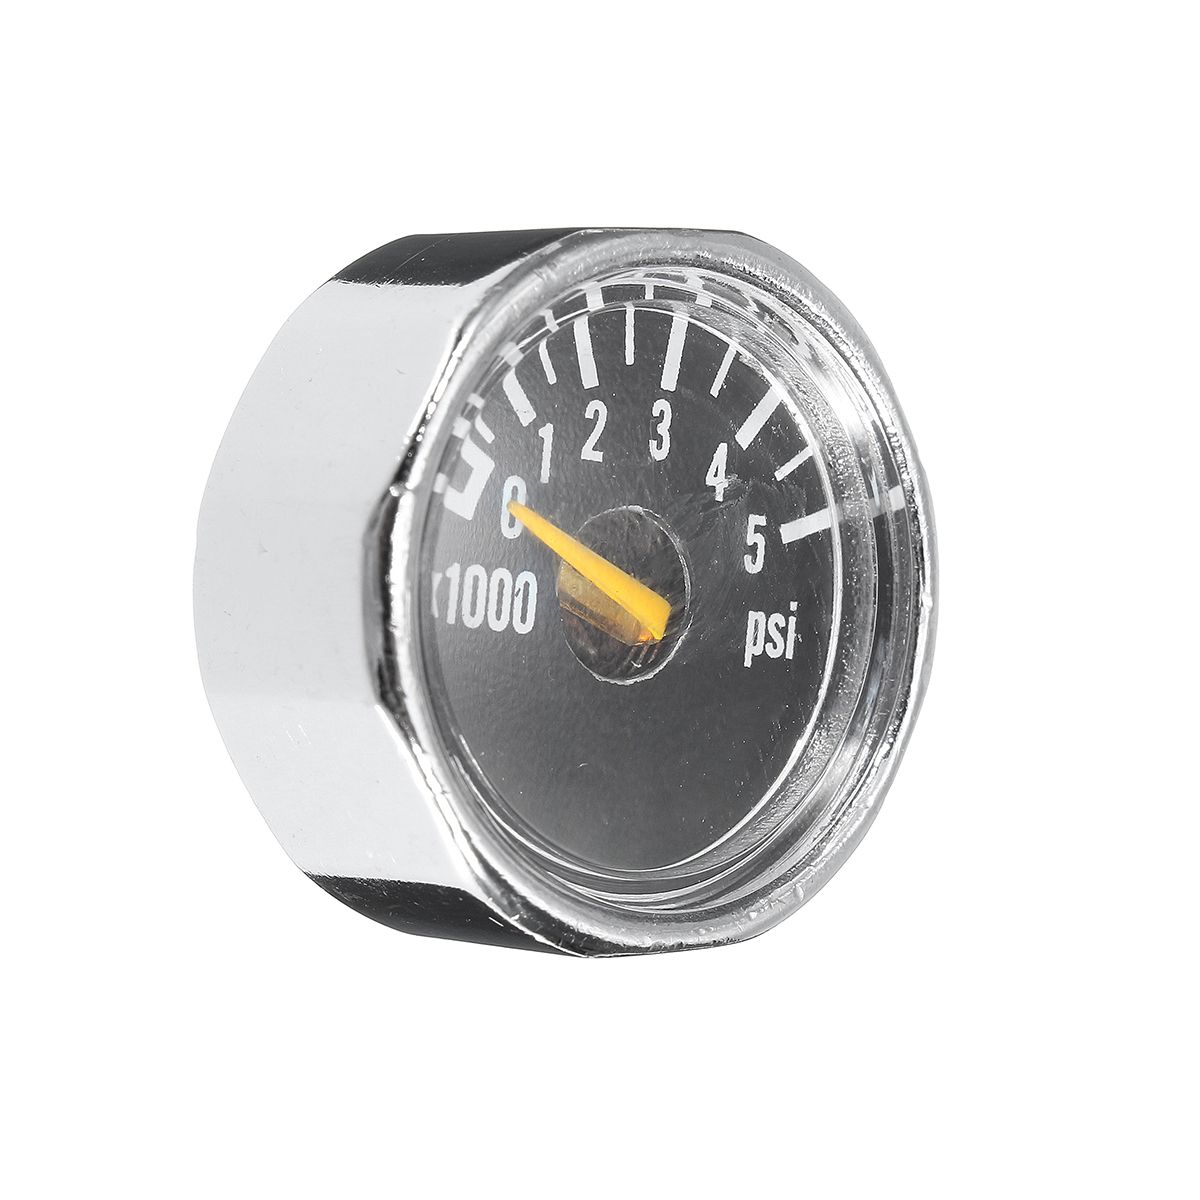 Micro-Gauge-1-inch-25mm-0-to-5000psi-High-Pressure-for-HPA-Paintball-Tank-CO2-PCP-1263873